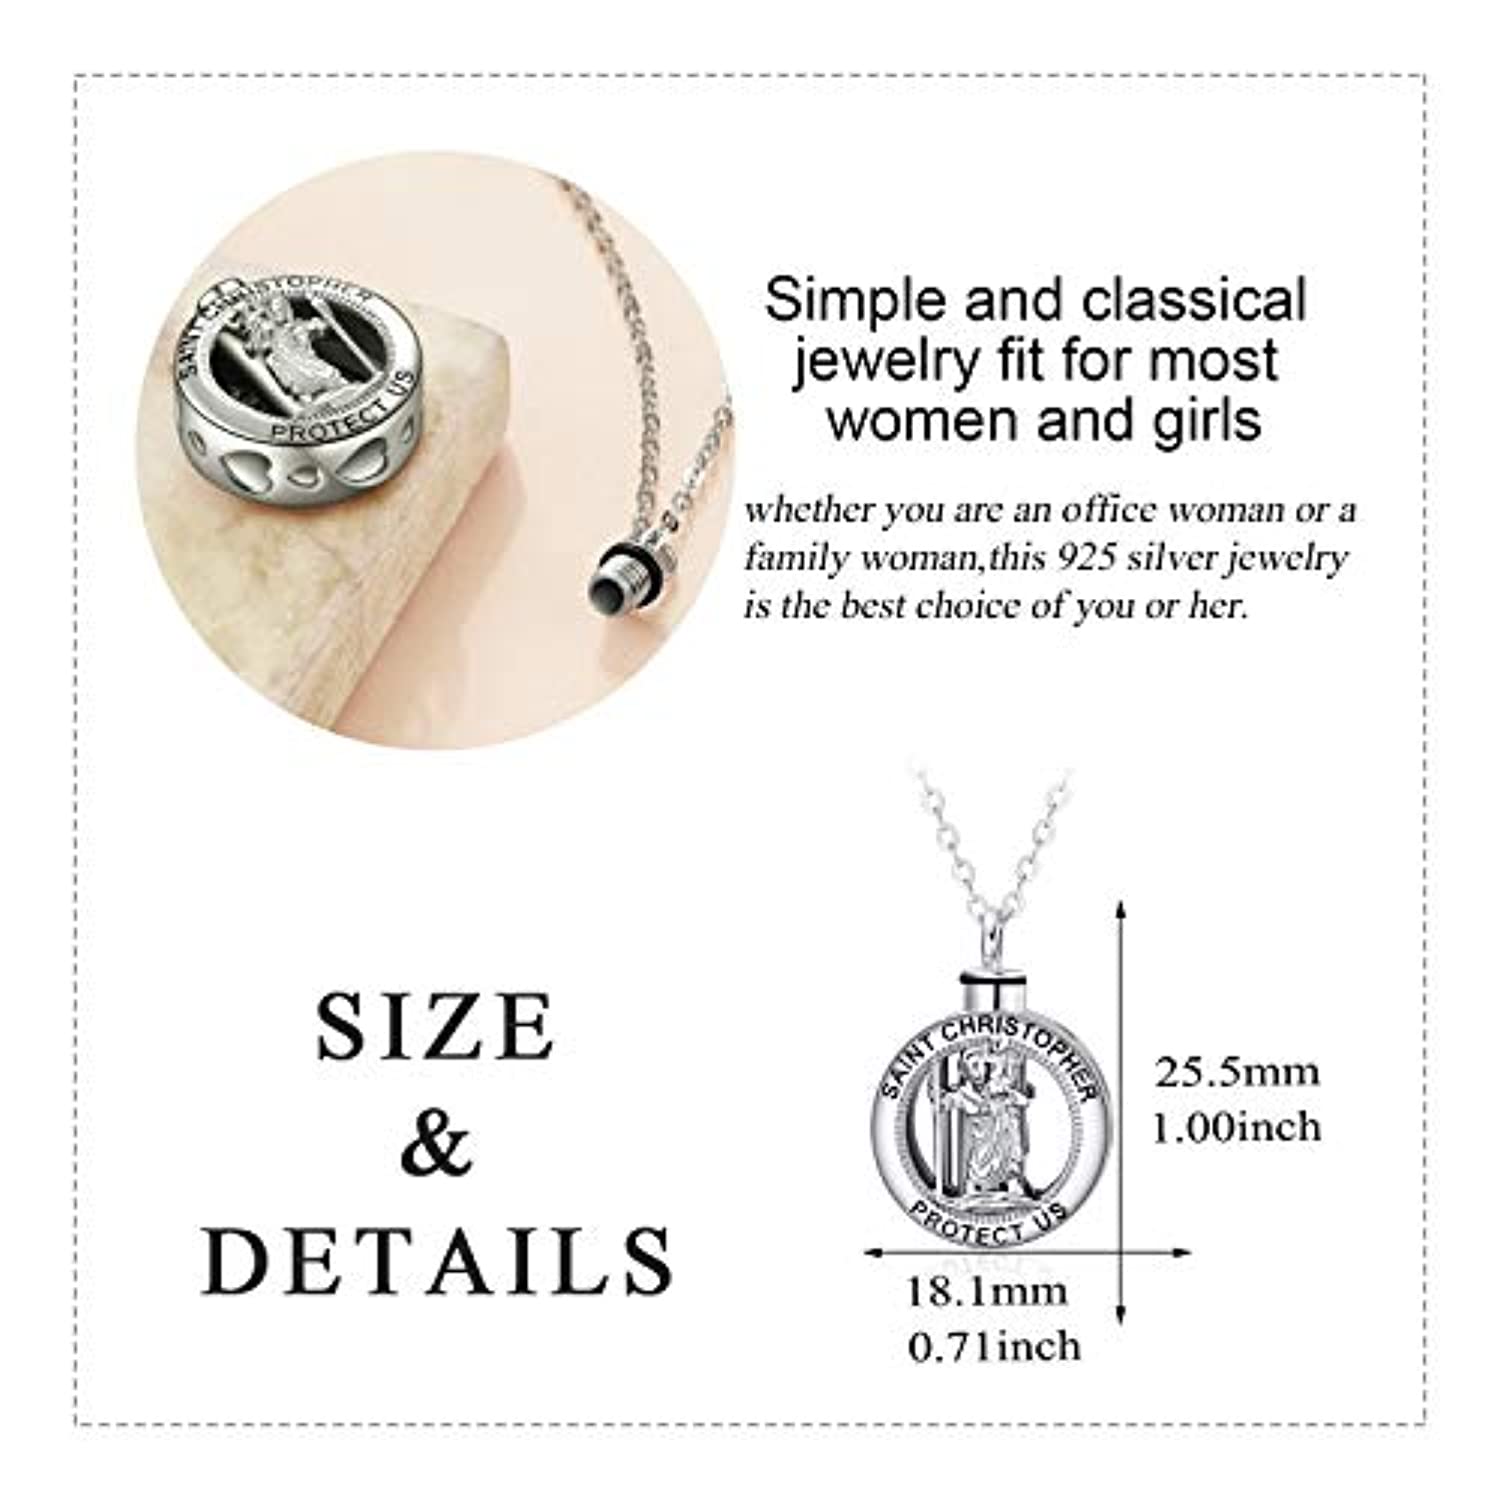 Saint Christopher Protect Us Necklace Urn Necklace for Ashes 925 Sterling Silver Religious Engraved Medallion Pendant Necklace Jewelry